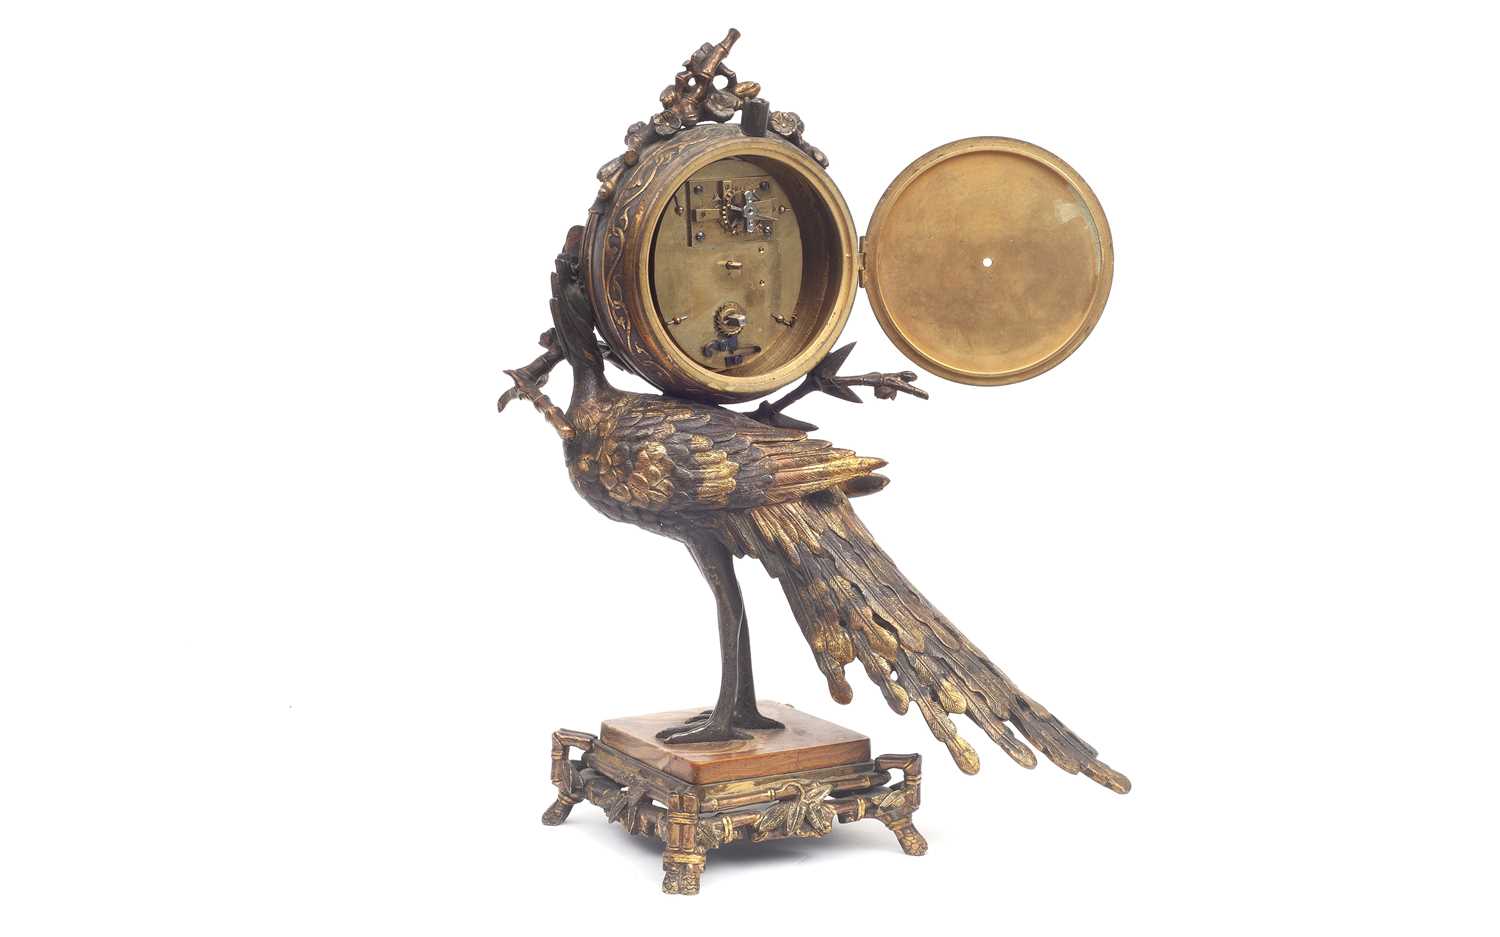 ATTRIBUTED TO L'ESCALIER DE CRISTAL, PARIS: A FINE LATE 19TH CENTURY FRENCH PEACOCK CLOCK - Image 4 of 4